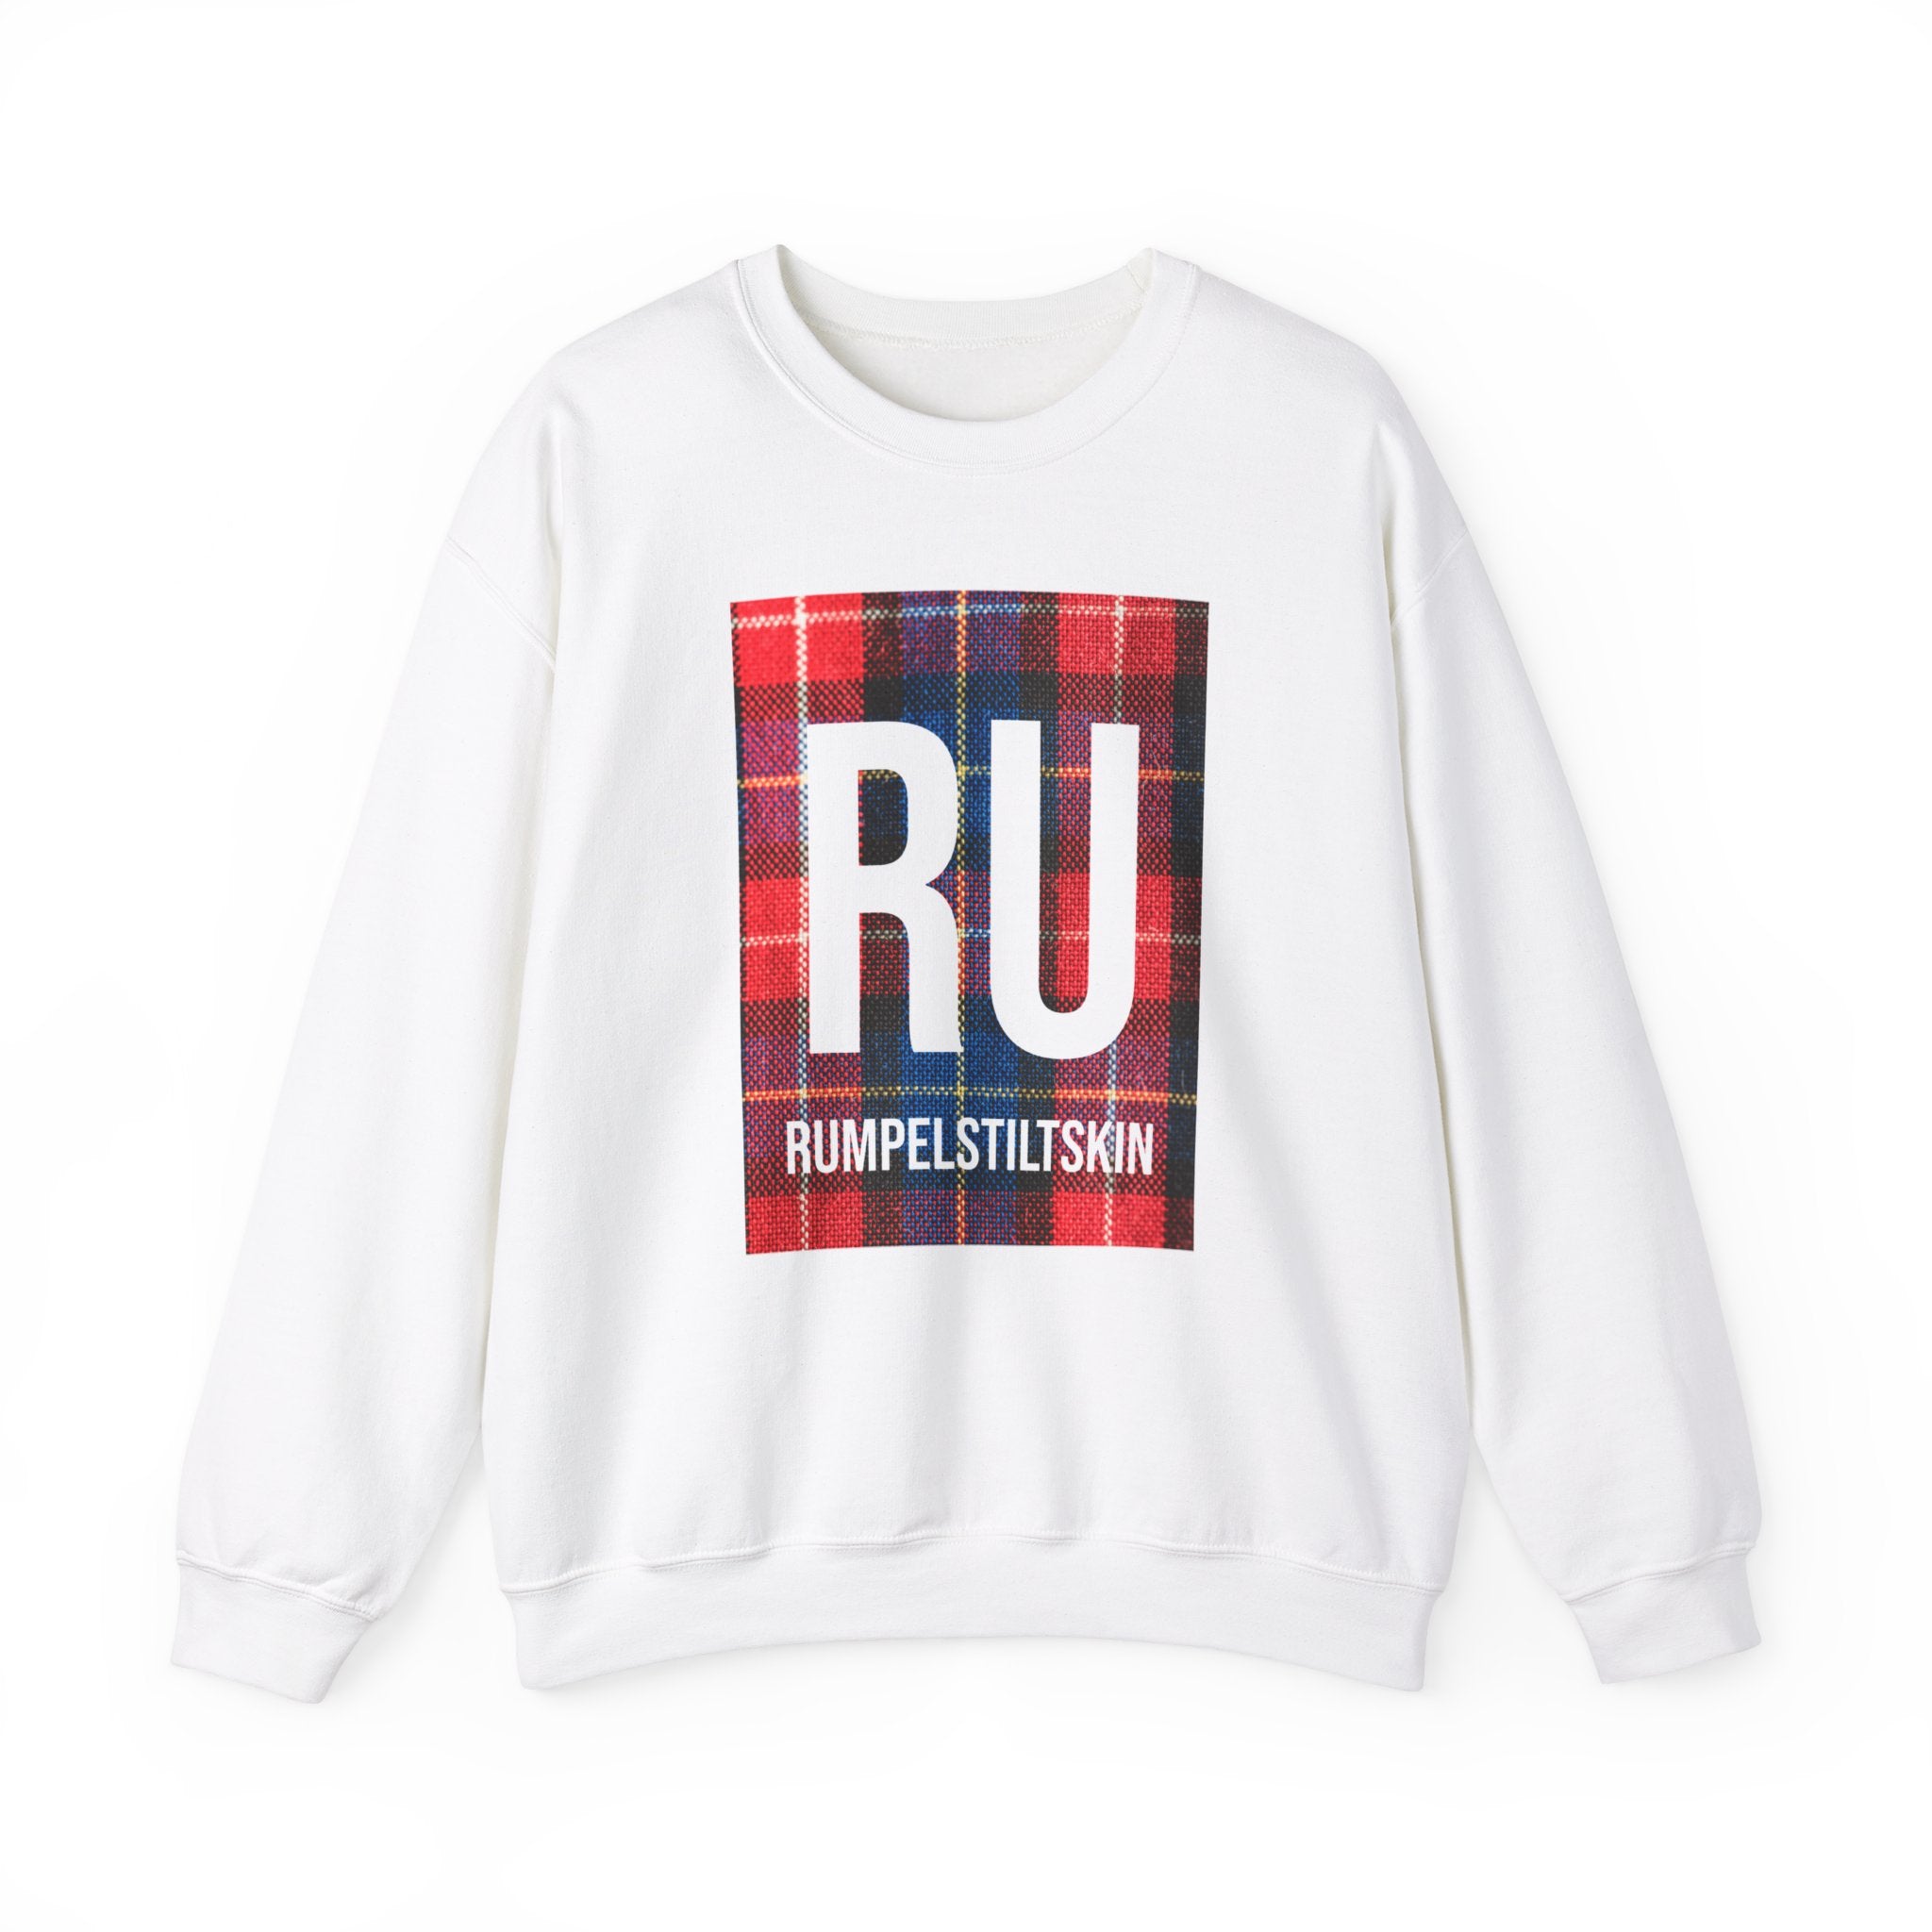 A cozy white RU - Sweatshirt perfect for the colder months, featuring a large red, blue, and purple plaid rectangle on the front with the letters "RU" and the word "Rumpelstiltskin" below it. This design sweatshirt seamlessly blends comfort with style.